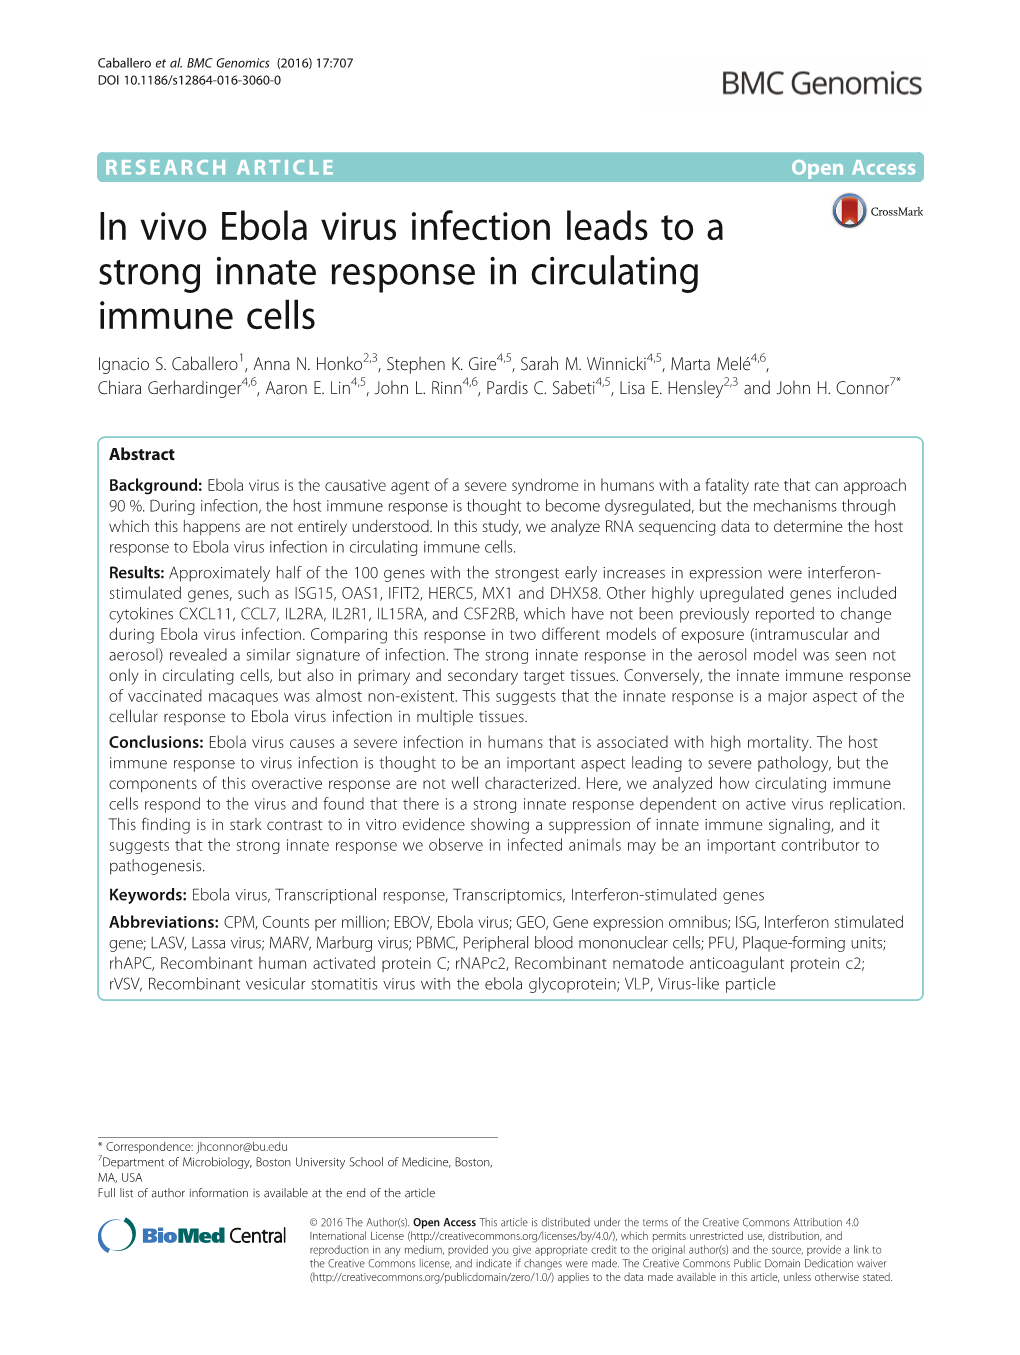 In Vivo Ebola Virus Infection Leads to a Strong Innate Response in Circulating Immune Cells Ignacio S